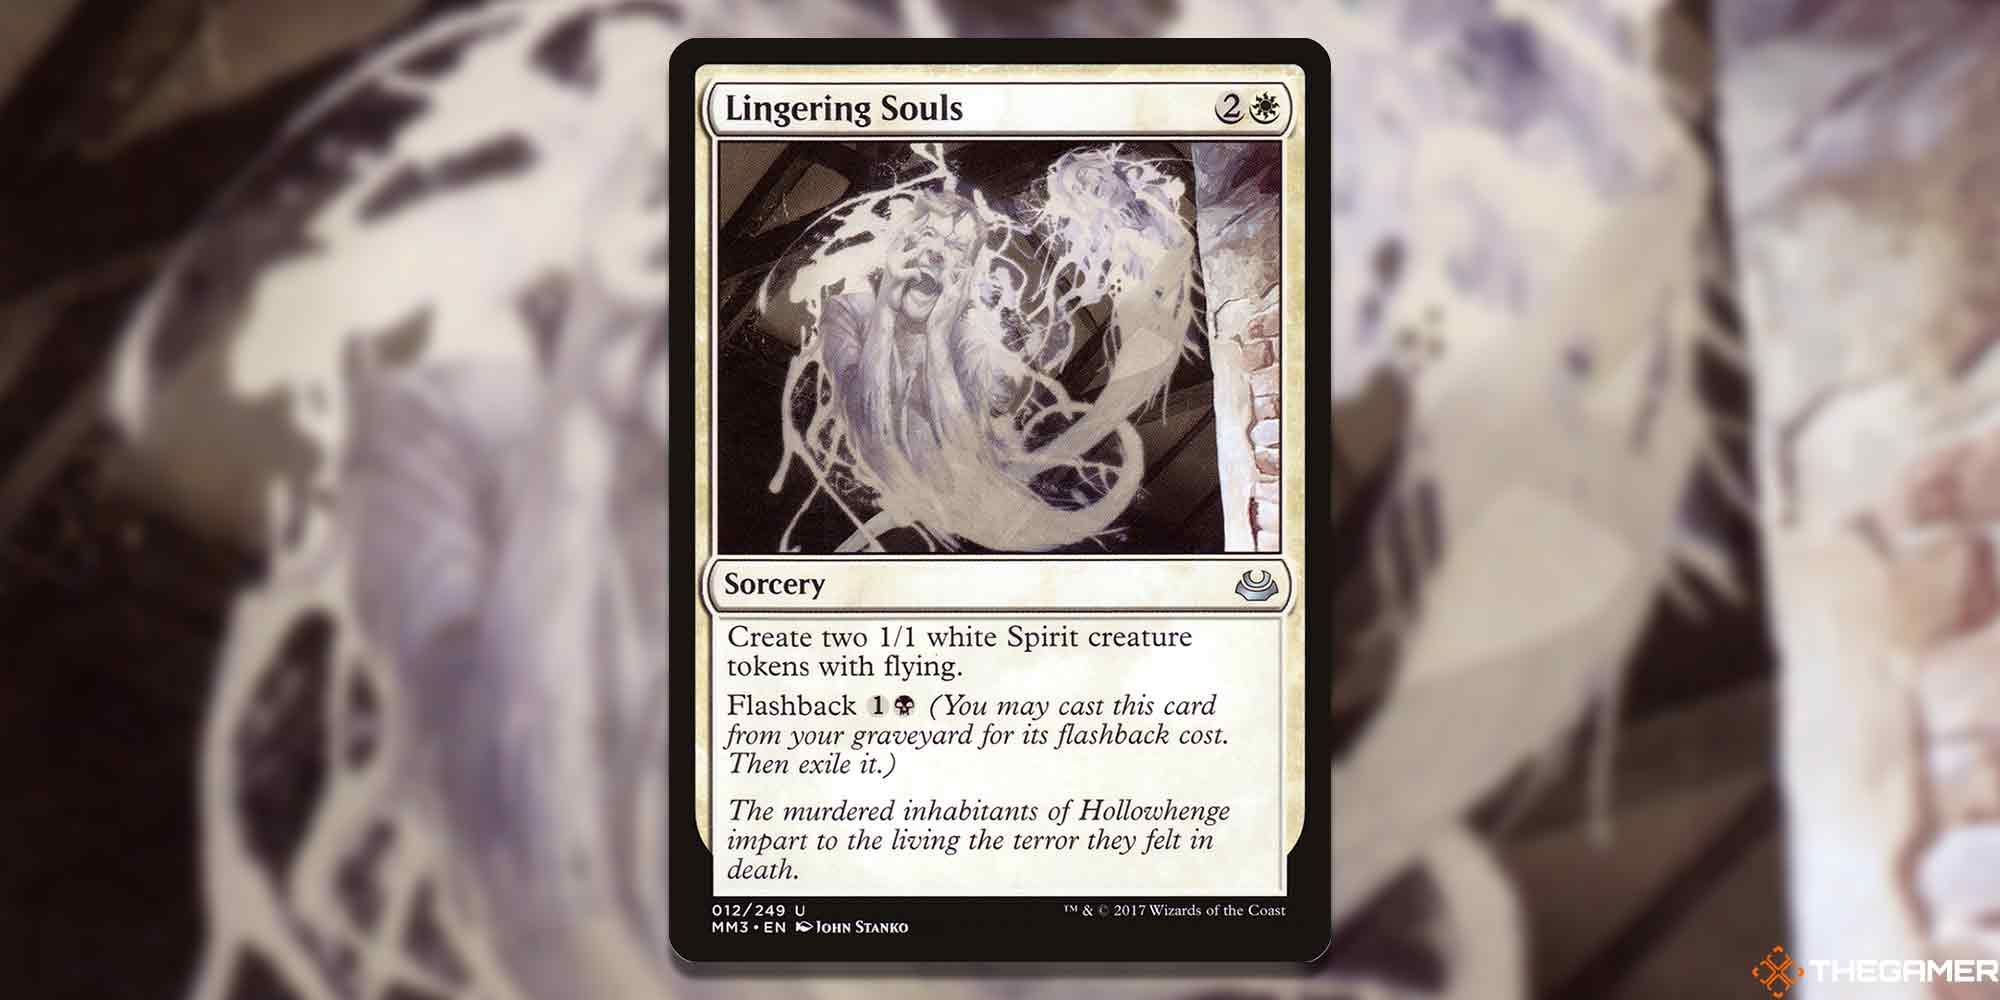 Image of the Lingering Souls card in Magic: The Gathering, with art by John Stanko